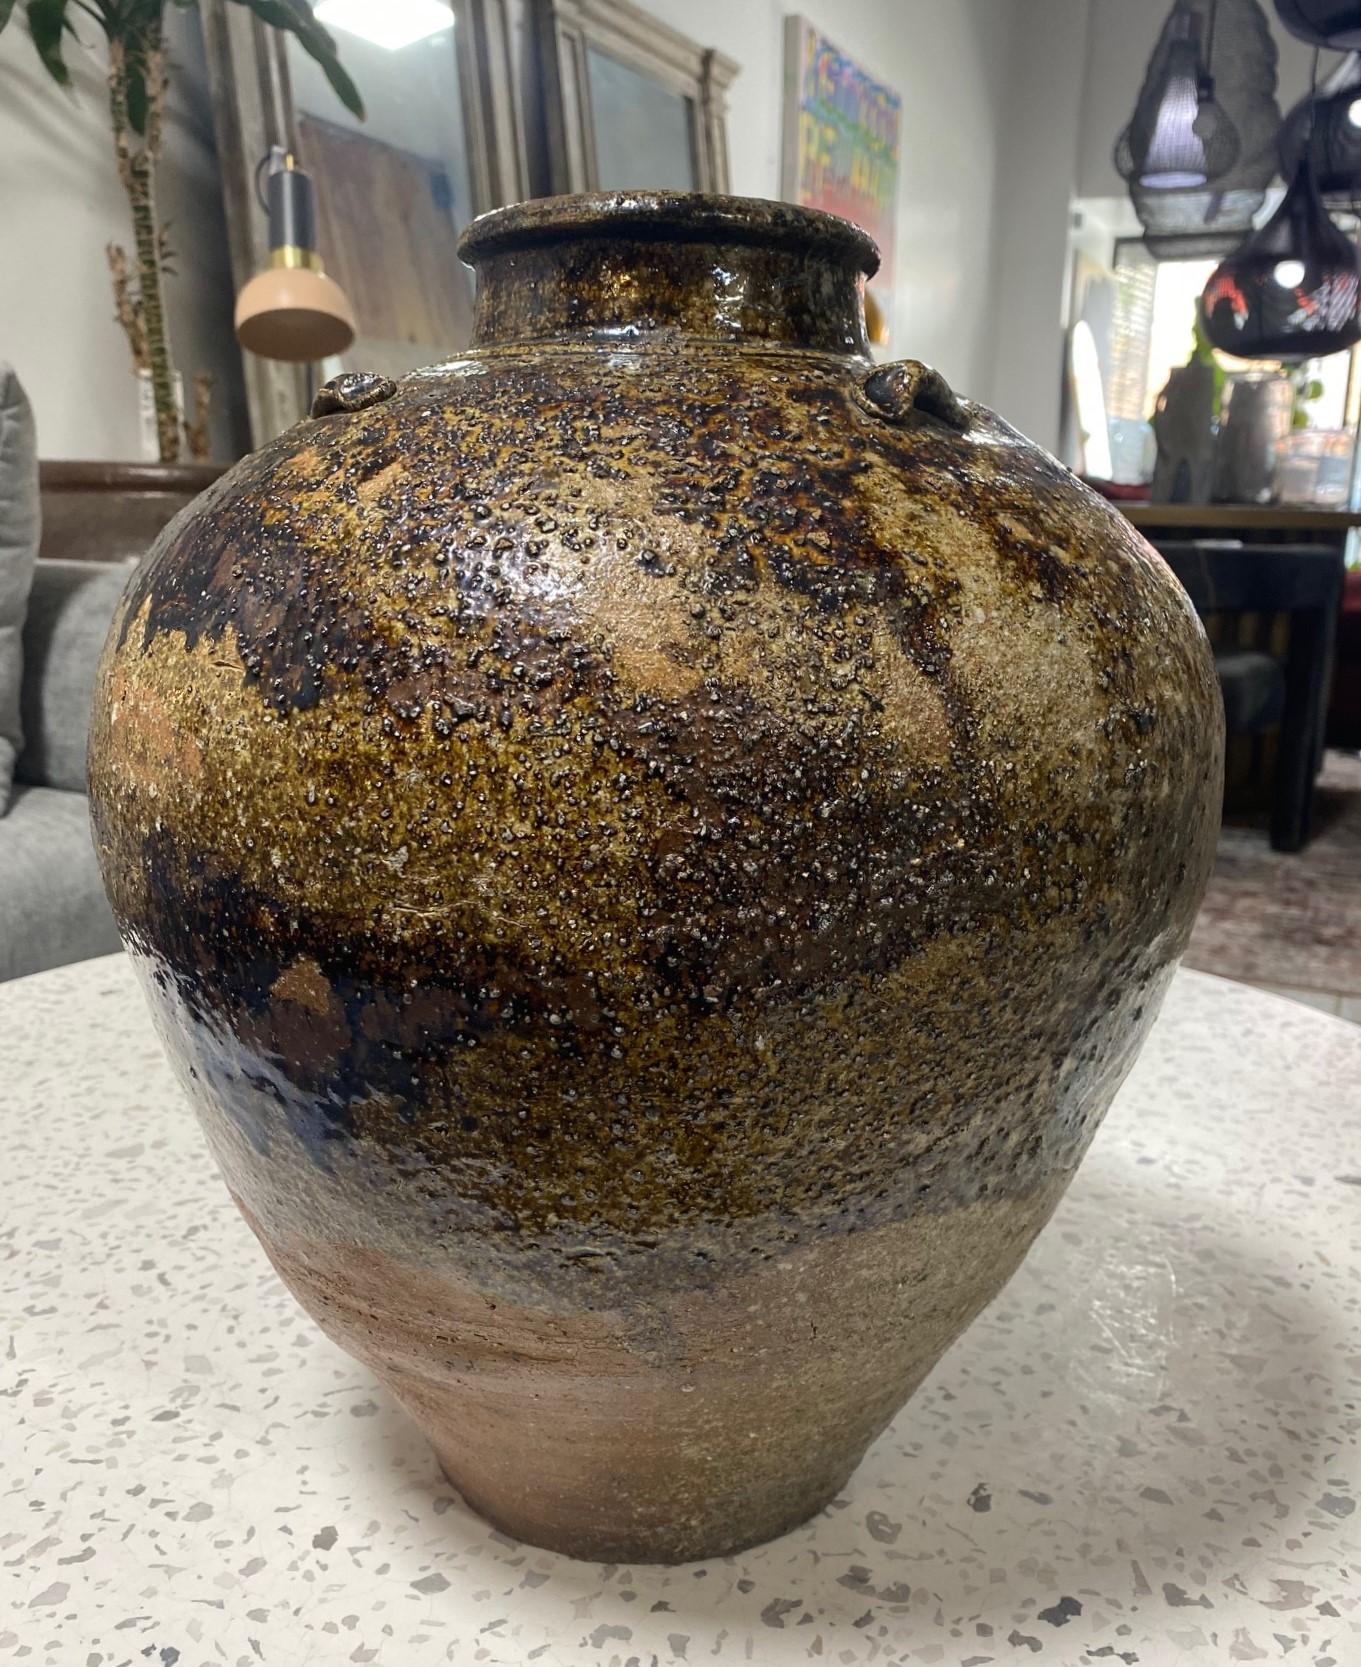 An absolutely stunning Tamba (Tanba) ware Japanese pottery vase/jar/pot - produced sometime during the Edo Period (1603-1867). Tamba-yaki ware is a type of Japanese pottery and ceramics produced in Sasayama and Tachikui in Hyogo Prefecture, Japan.